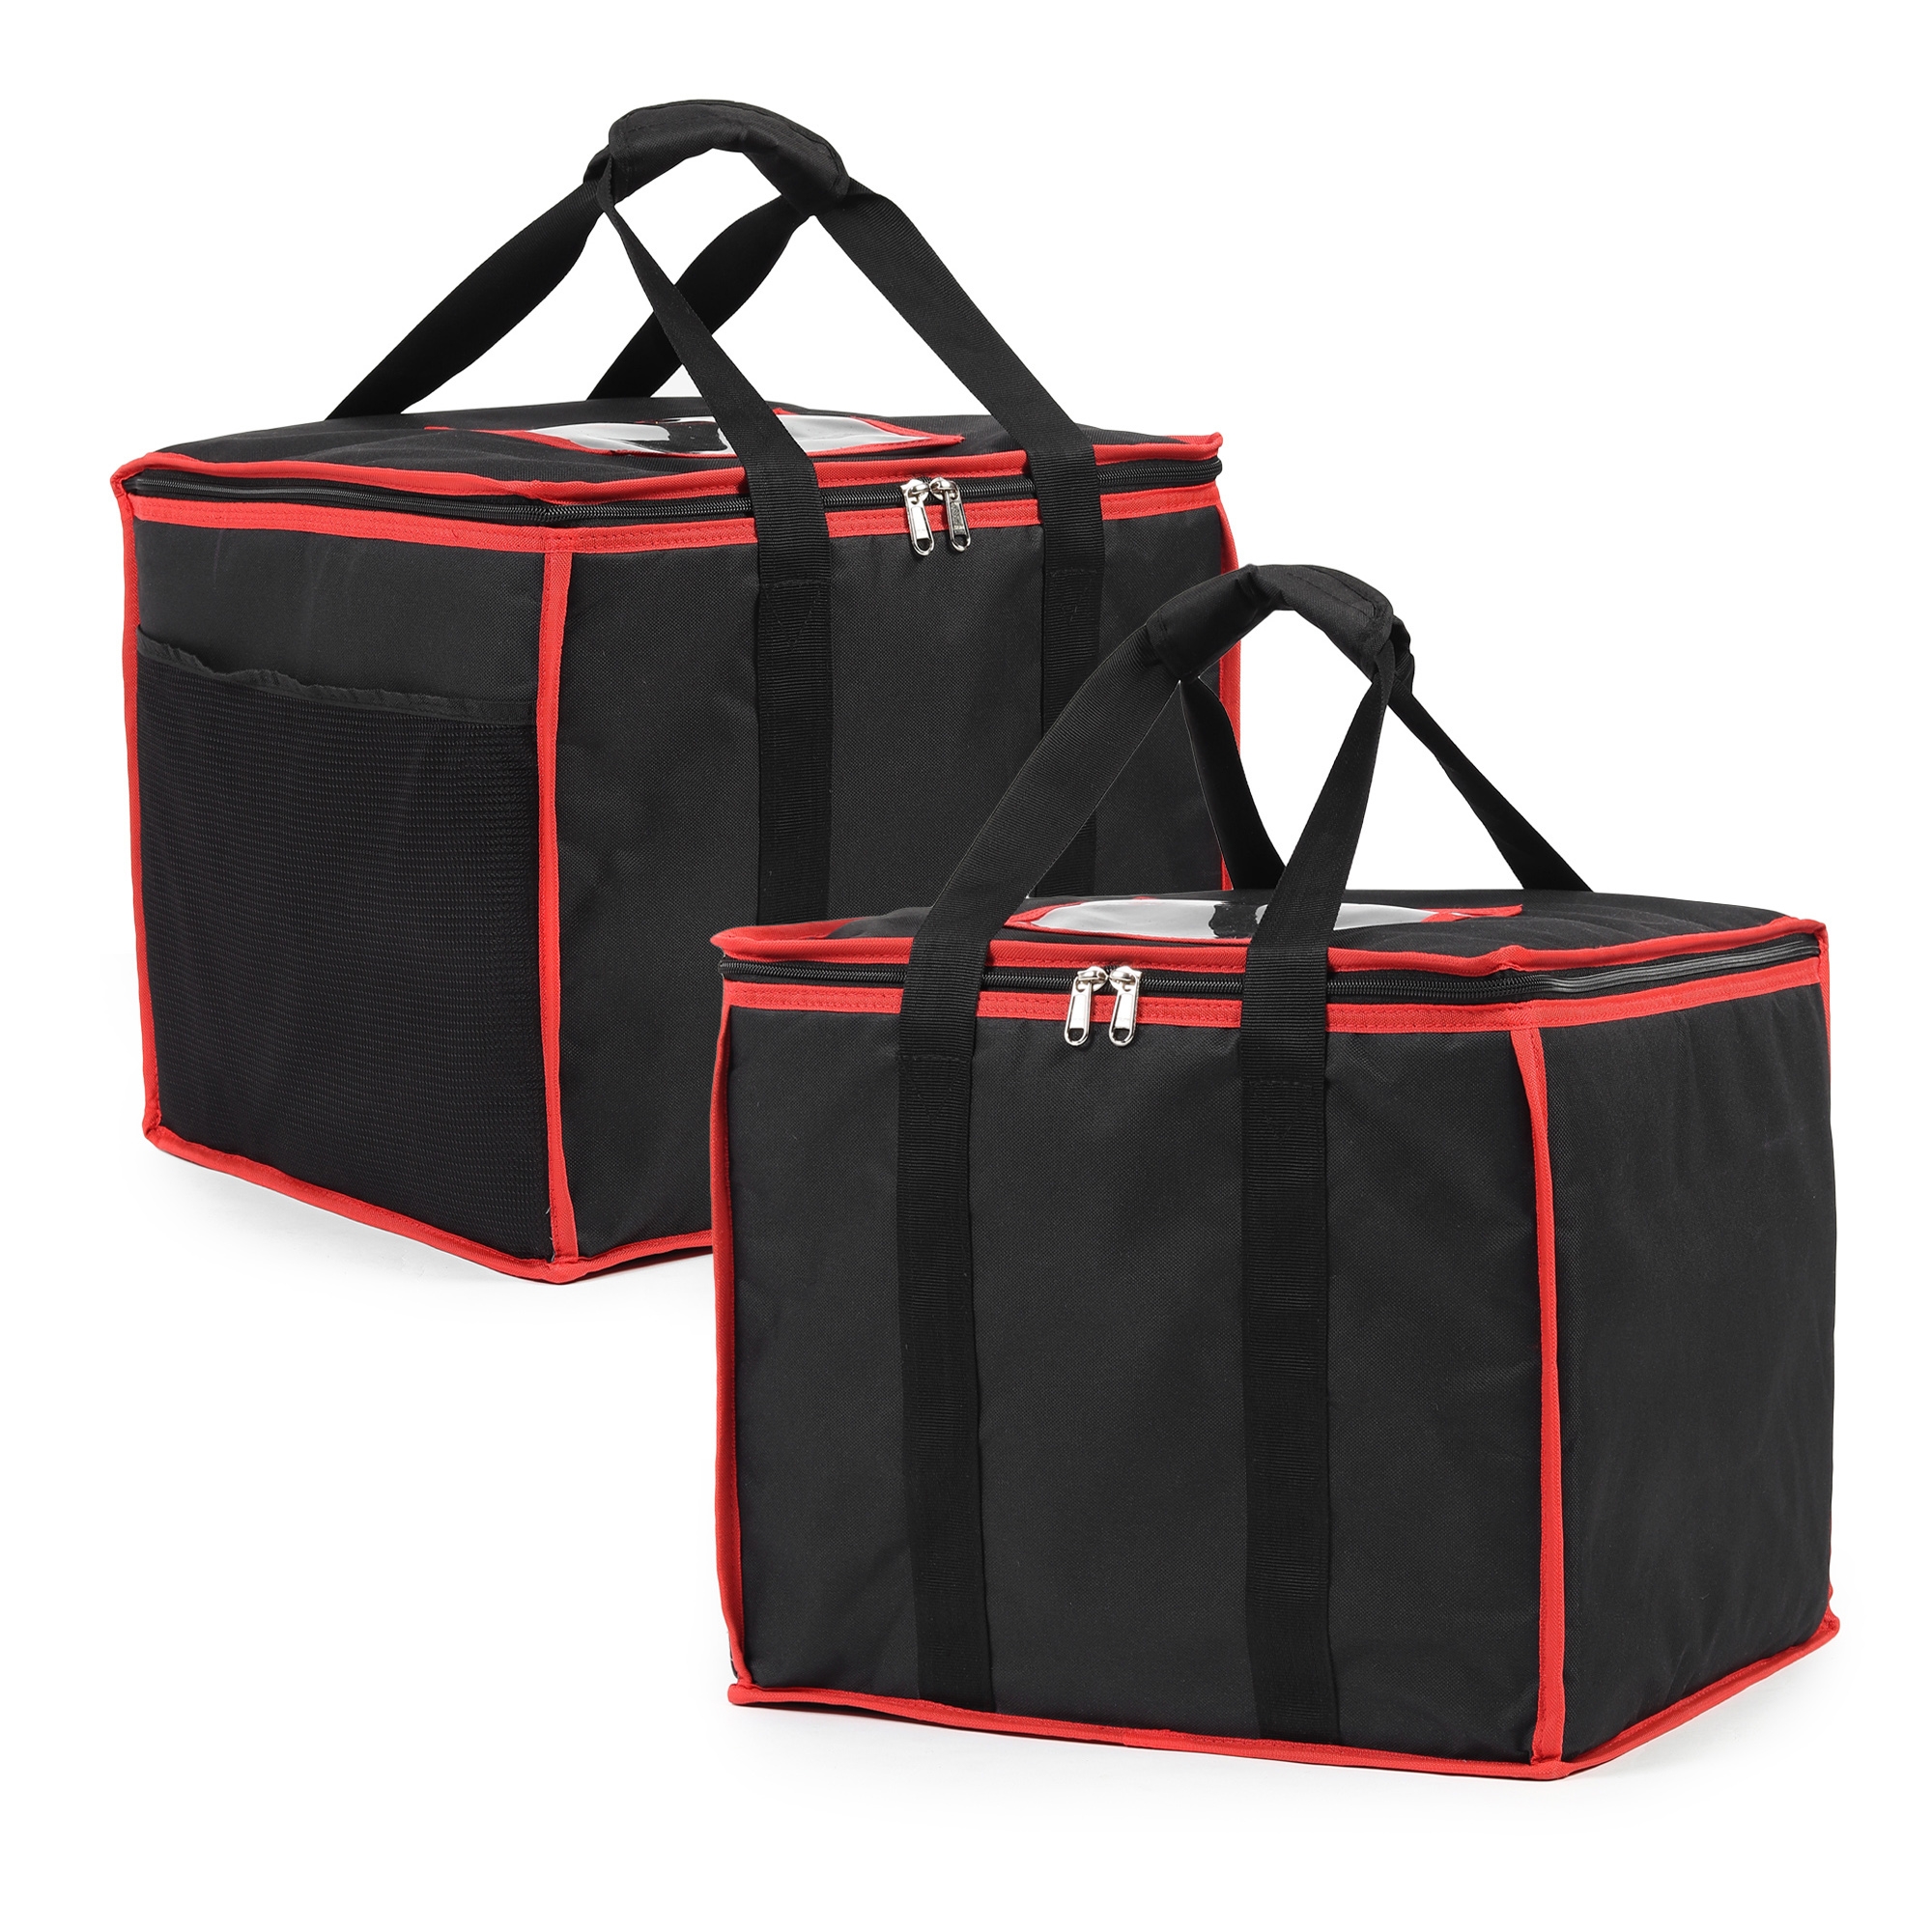 DOUBLE R BAGS | DOUBLE R BAGS Thermal Bags for Cold and hot Food Bag (Red) 0